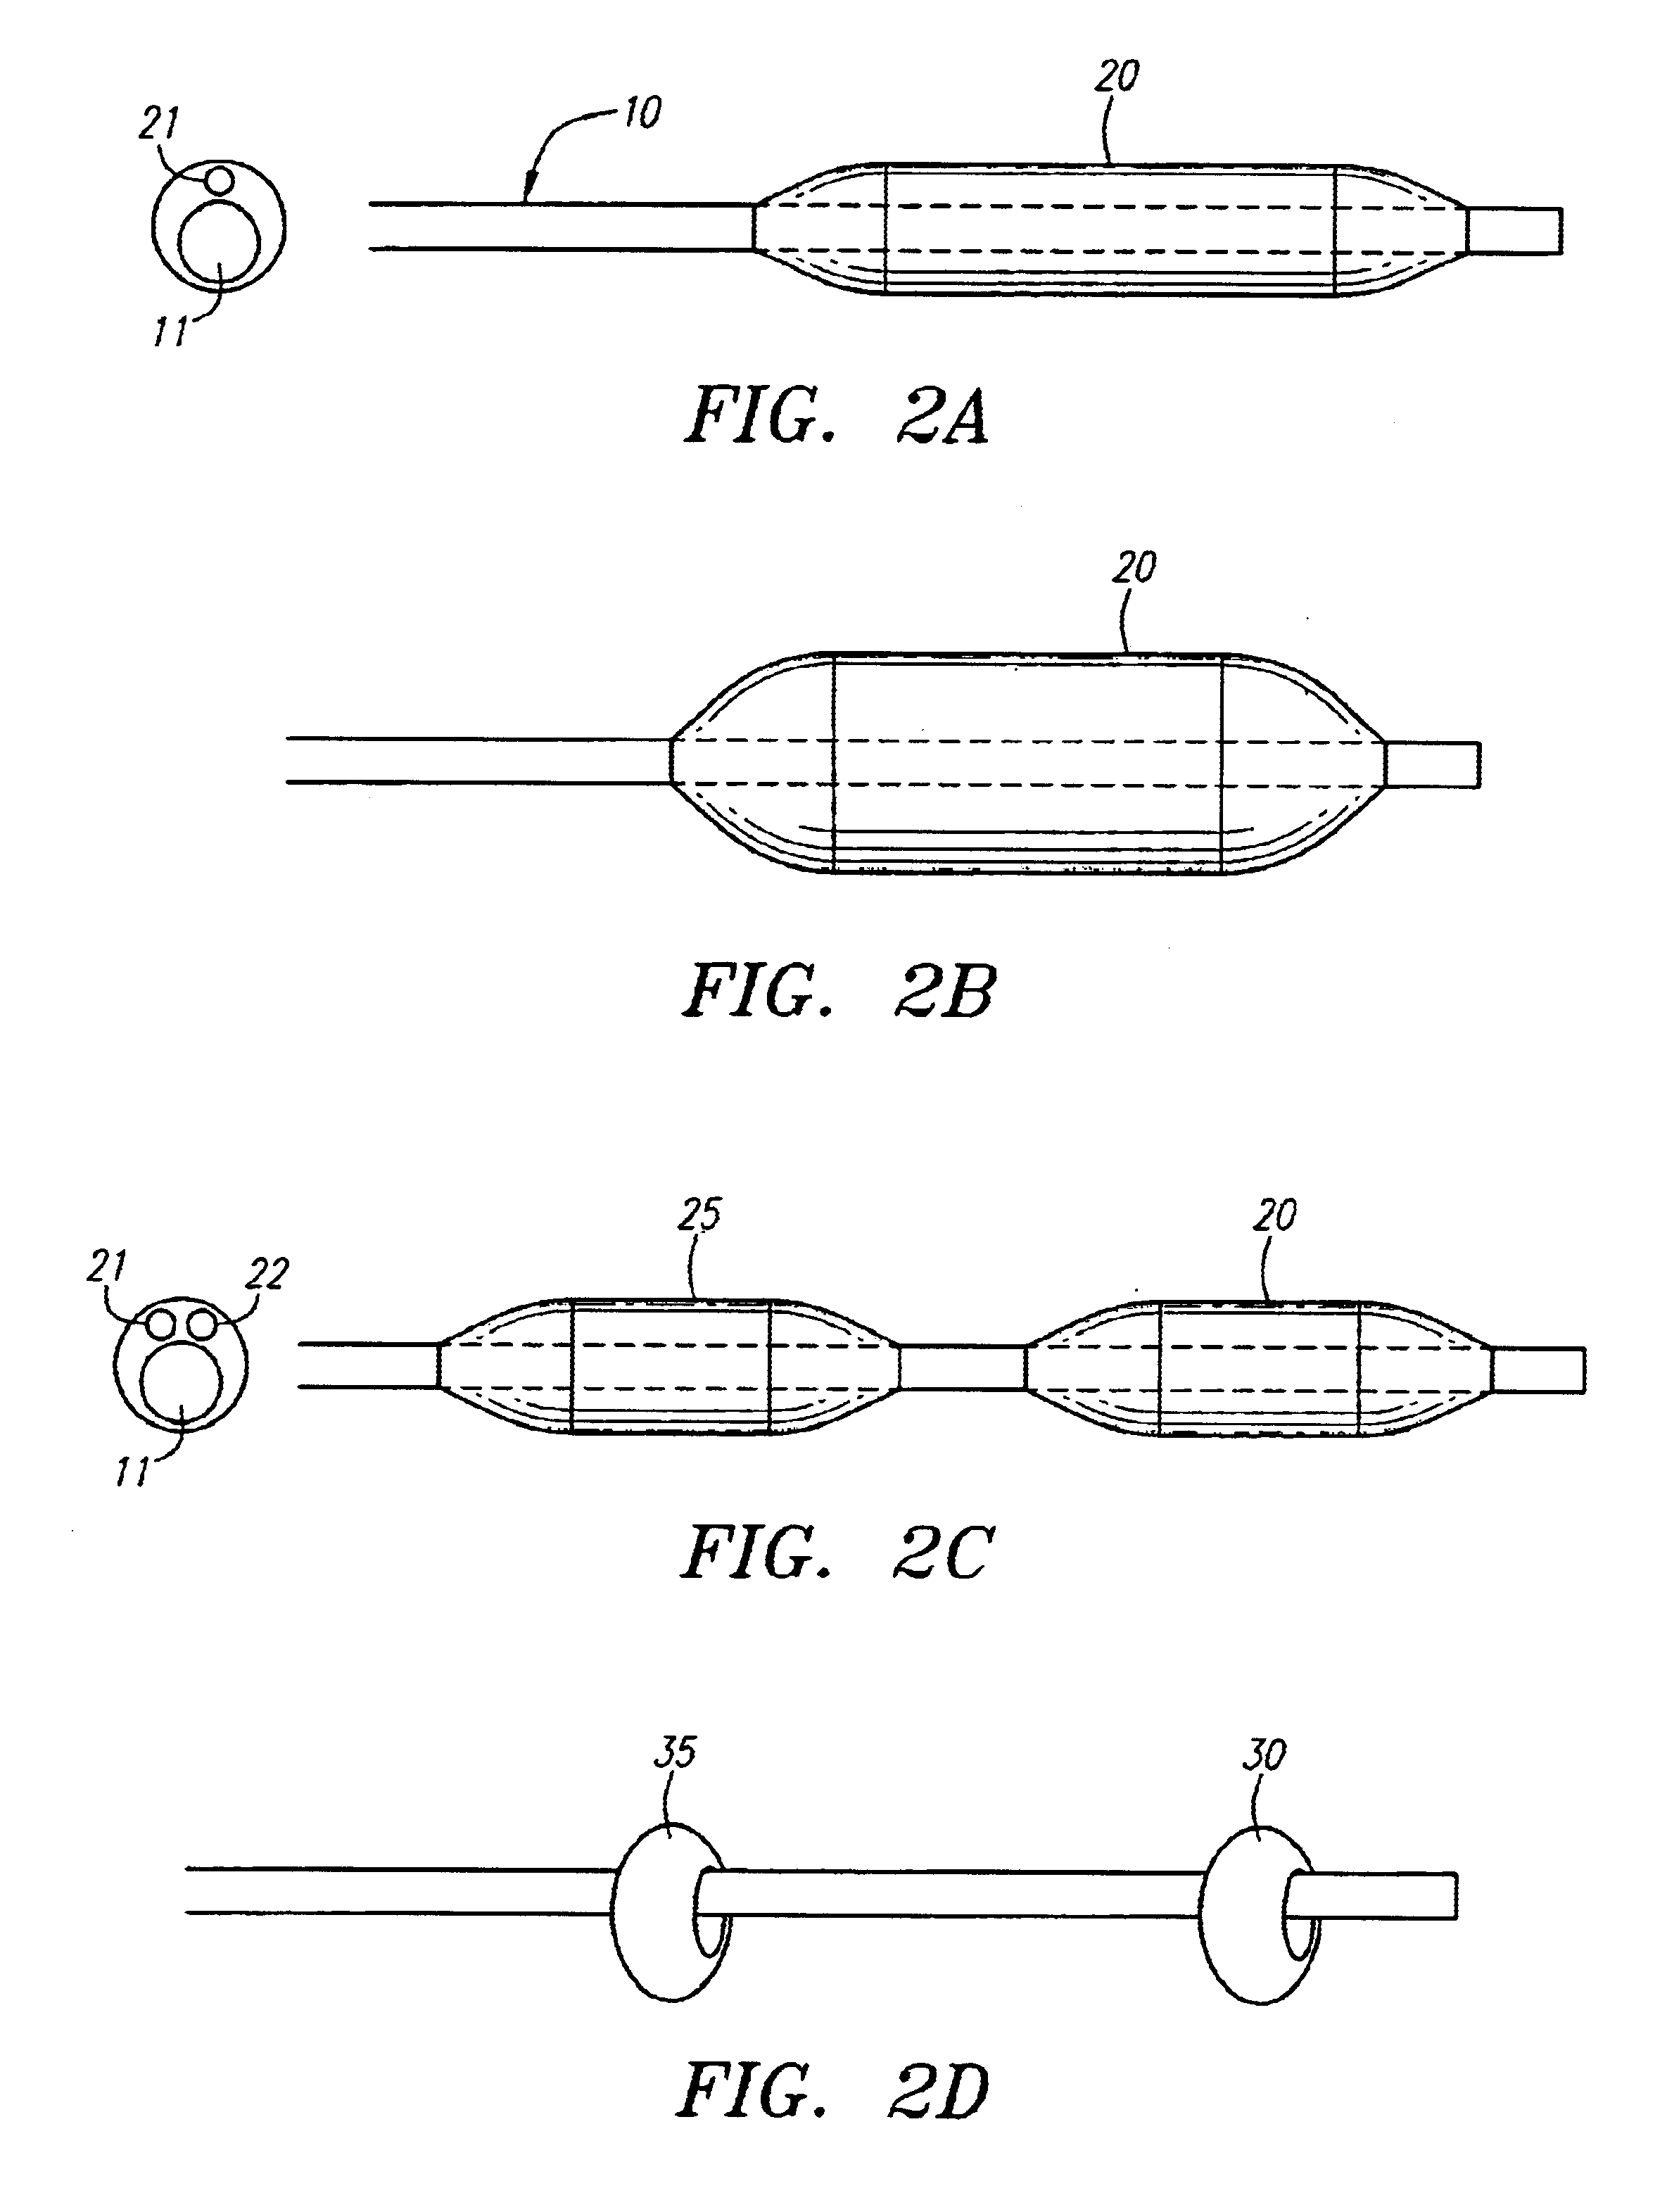 Devices and methods for cerebral perfusion augmentation